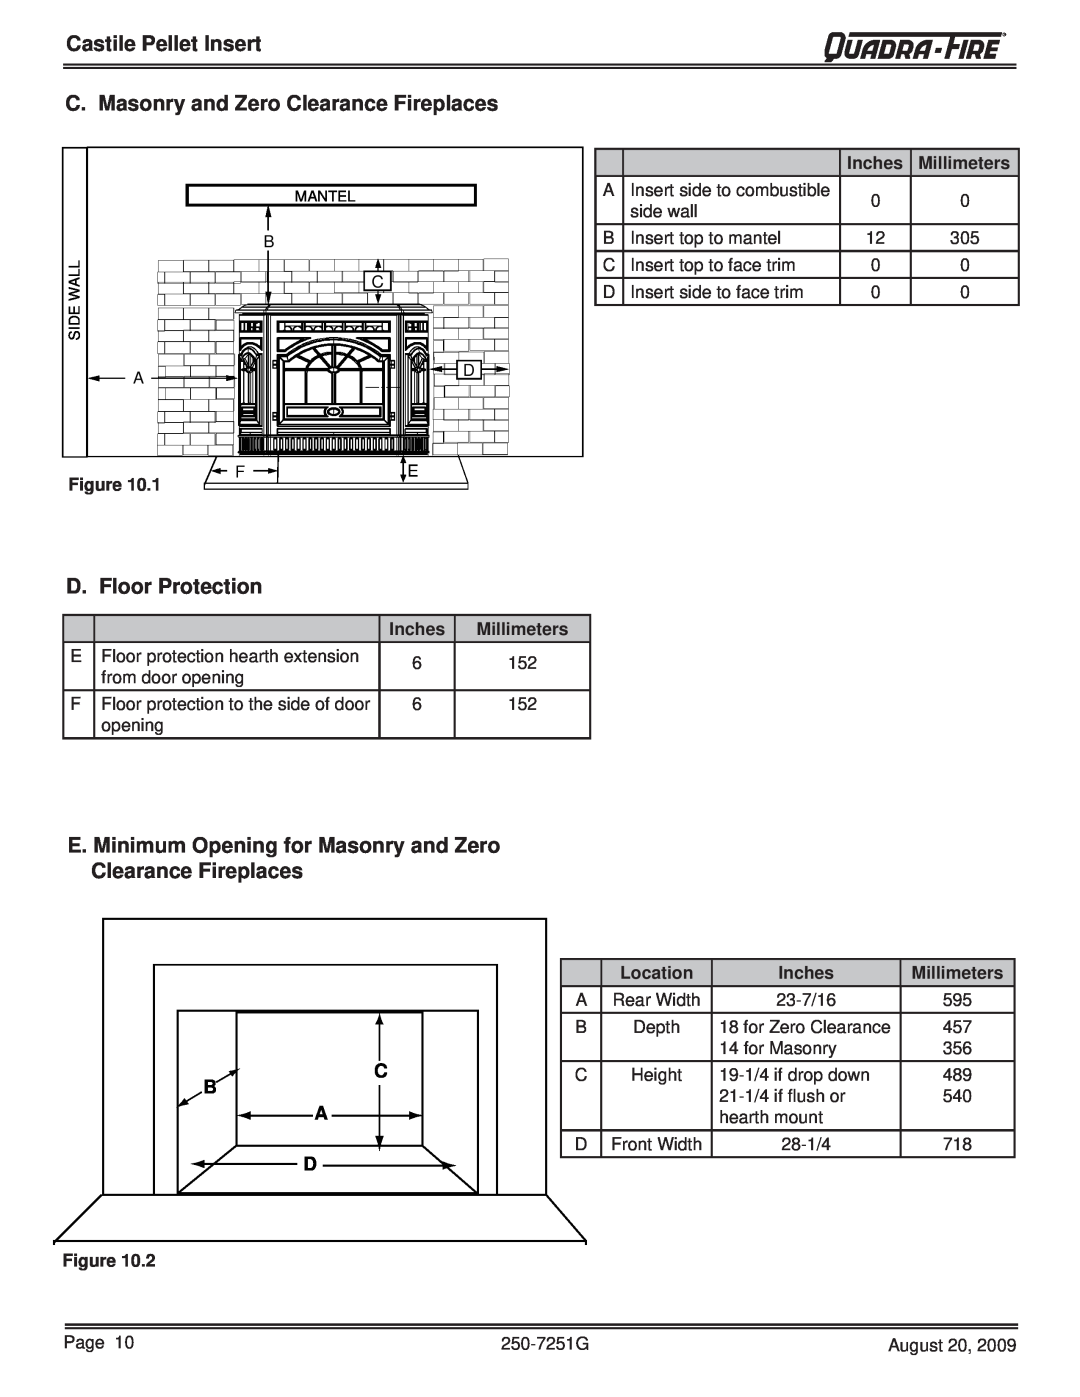 Quadra-Fire 810-02901 C. Masonry and Zero Clearance Fireplaces, D. Floor Protection, Location, Castile Pellet Insert 